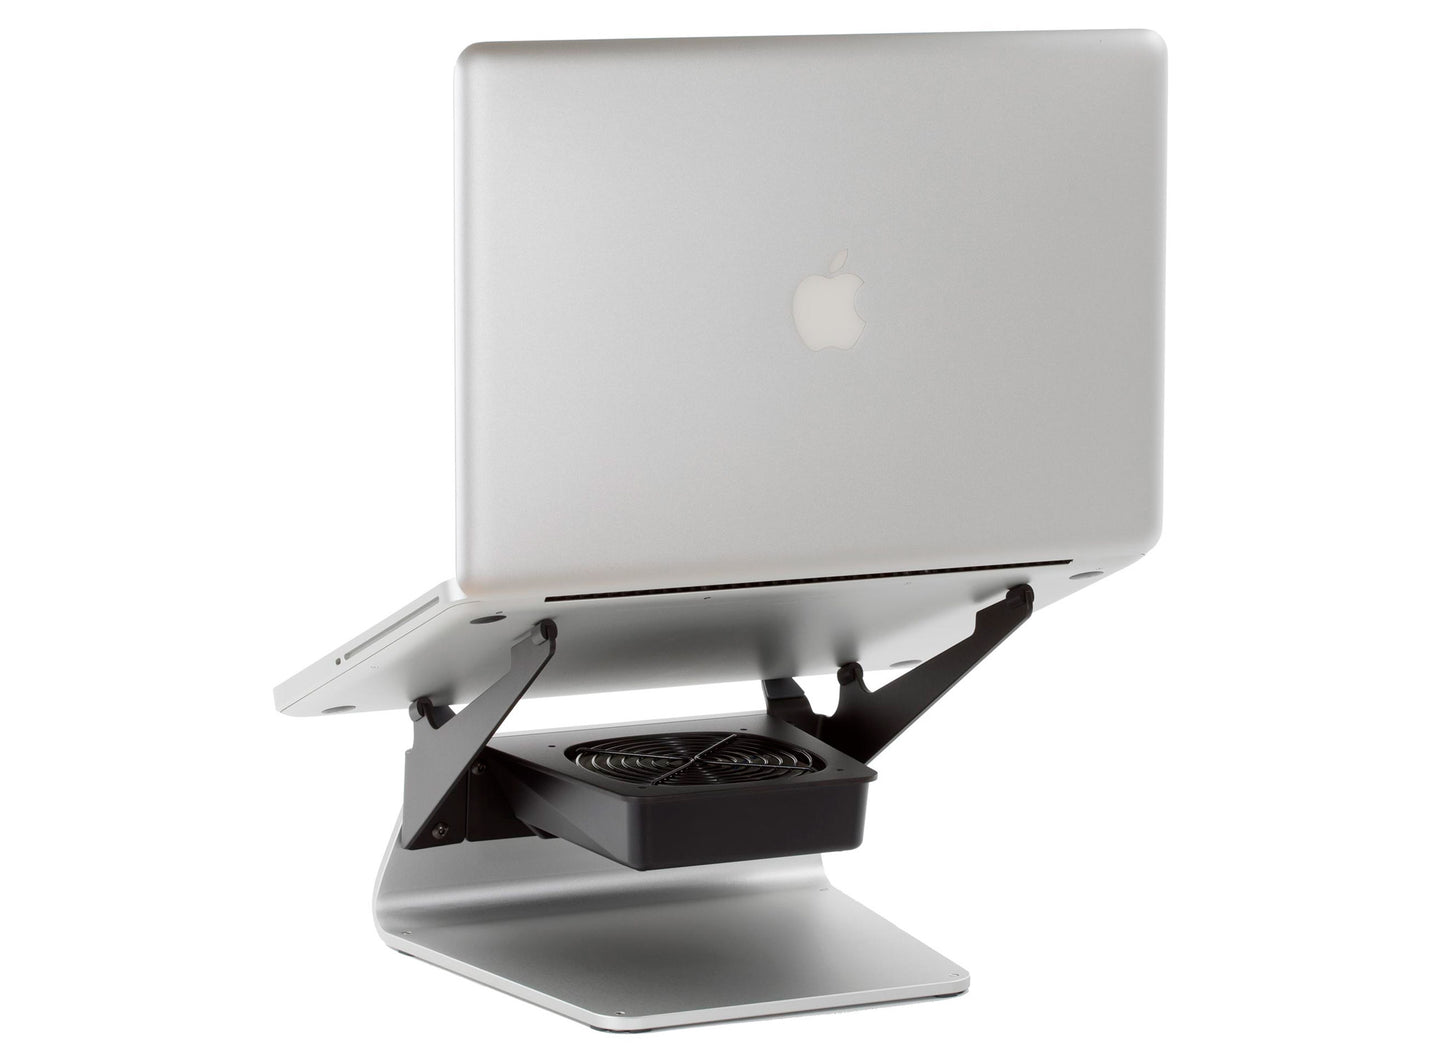 SVALT Cooling Stand model SxG17 silver back side view for quiet fan cooling performance with Apple and PC laptops